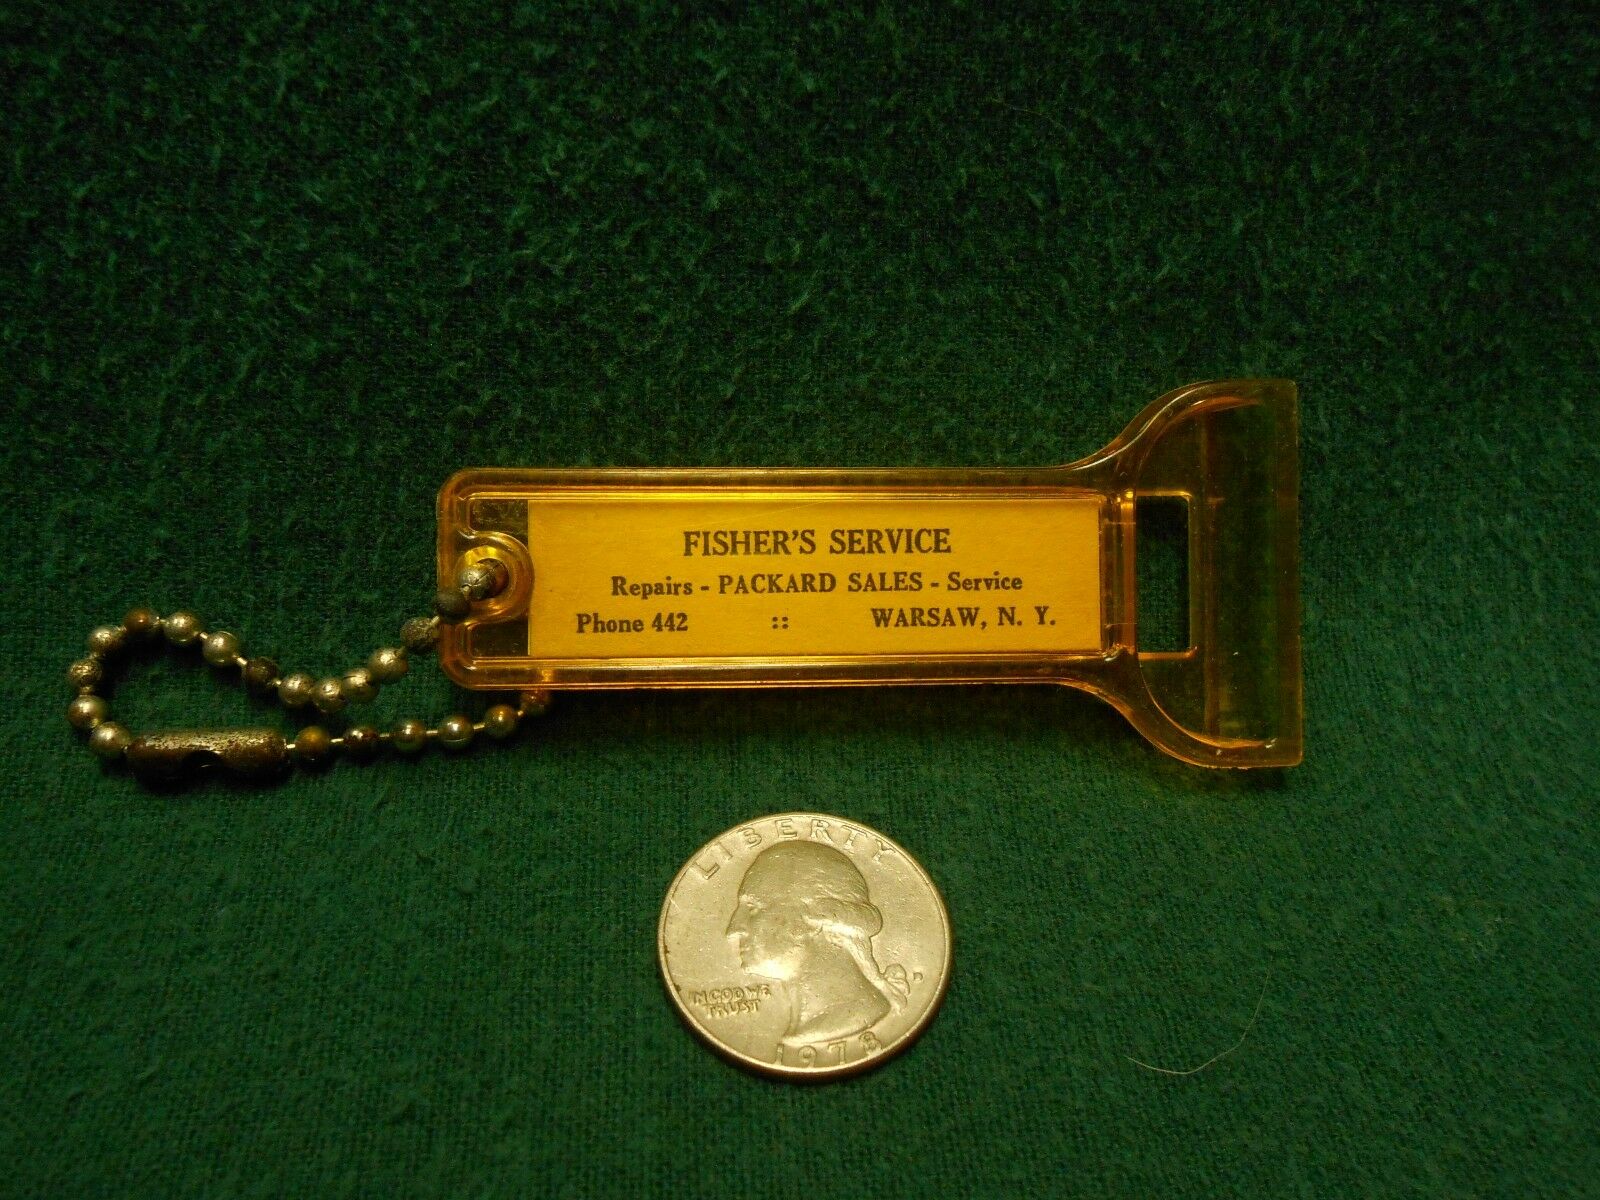 Original Packard Collectible Key Chain Ice Scraper Fisher's Service Warsaw N.y.